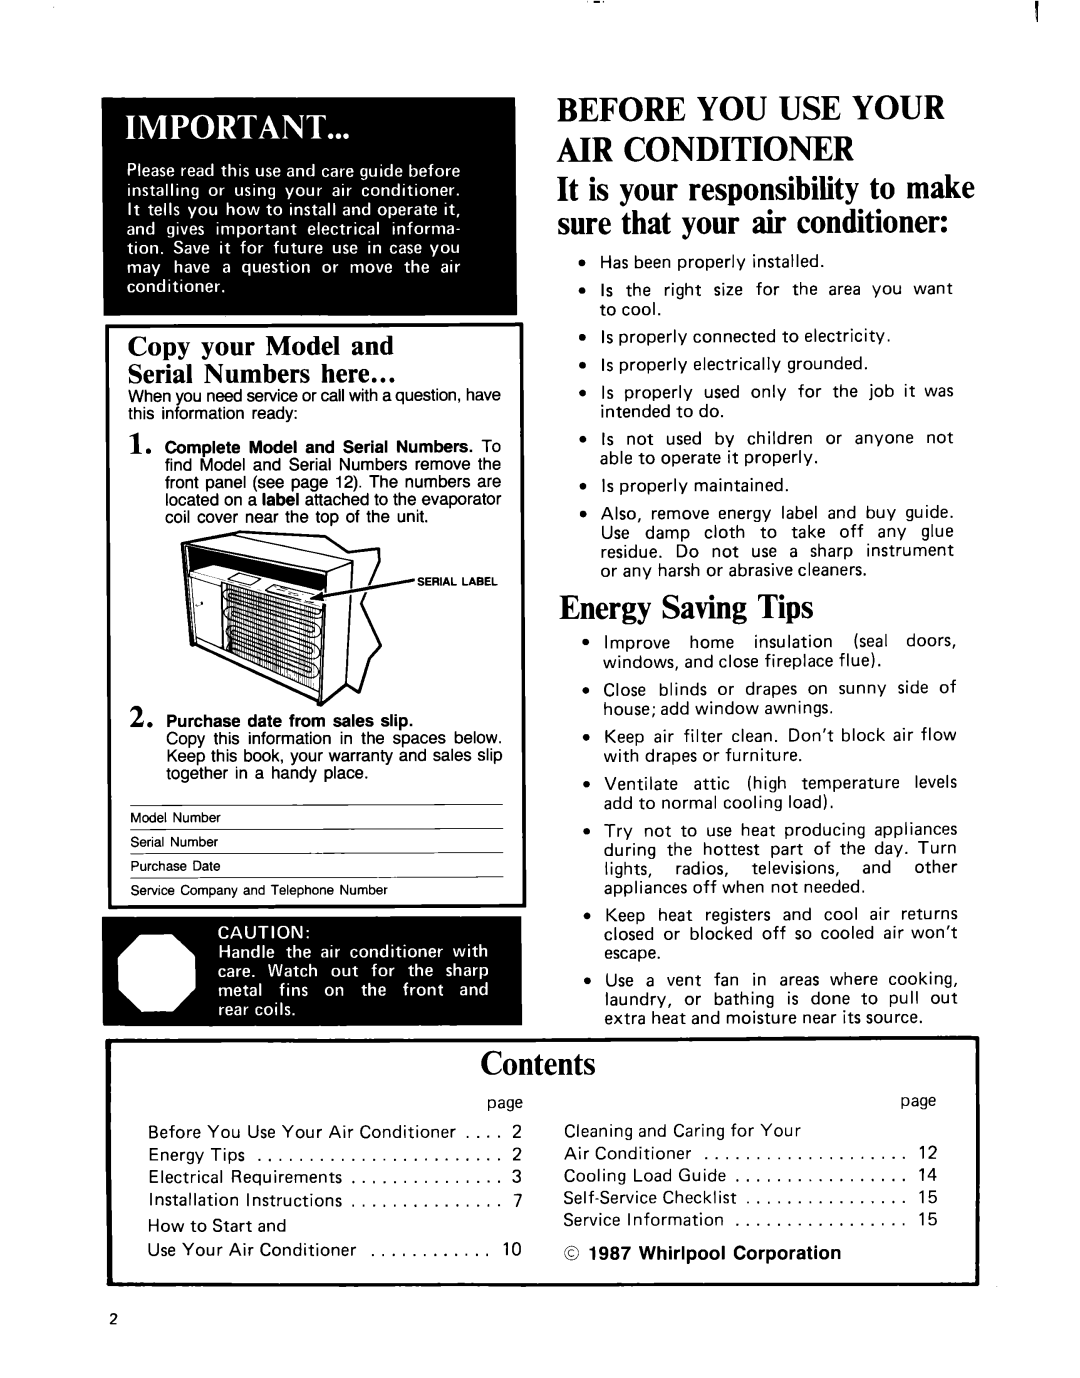 Whirlpool ACE184XM0 manual Energy SavingTips, Contents, Before You Use Your Air Conditioner, page 